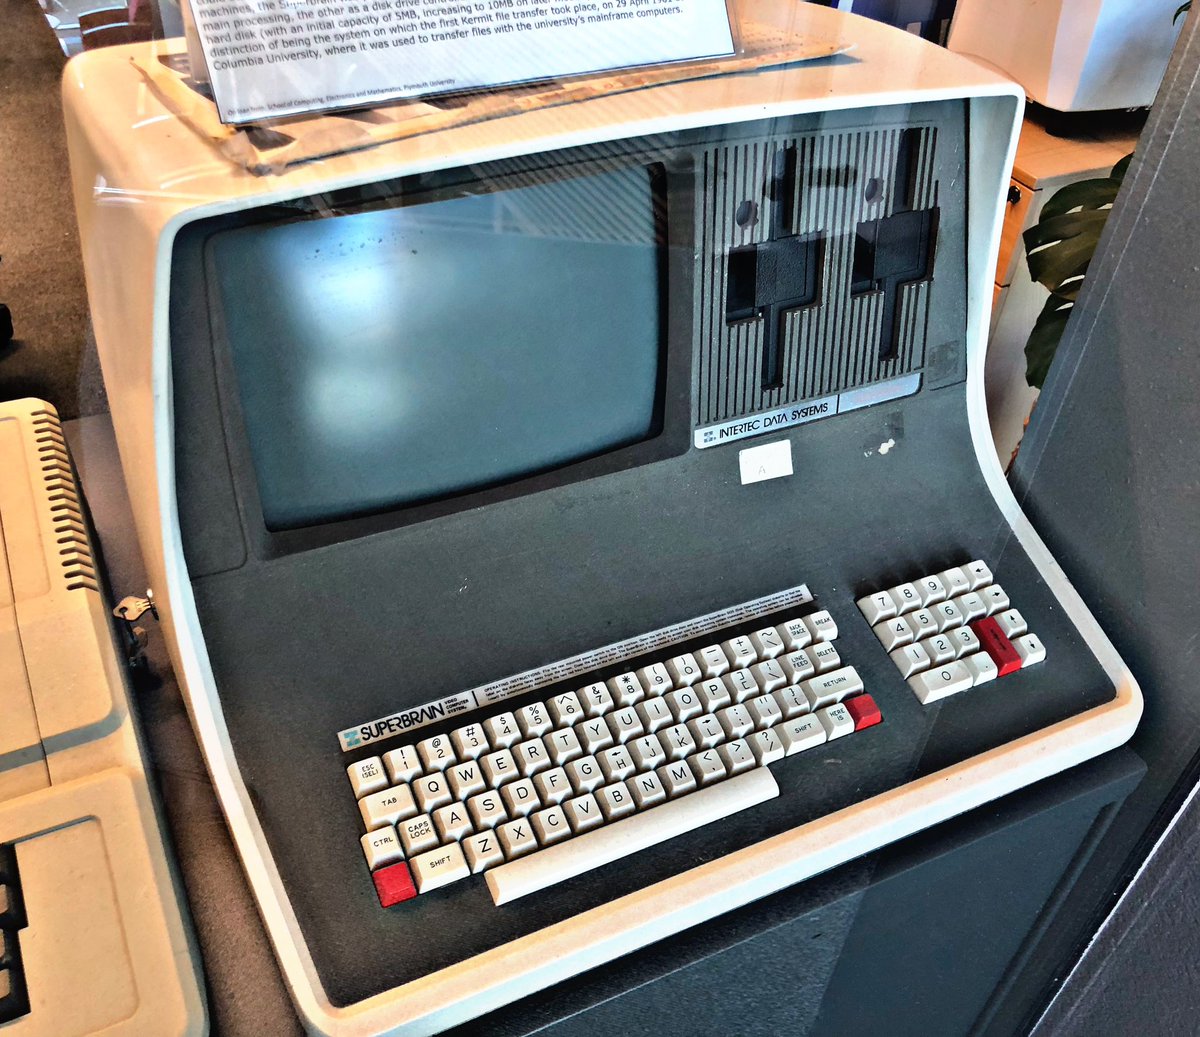 You’ve got an #Intertec #Superbrain. Do you save it or swap it? If saving, then why? If swapping, then for what? #RetroSaveOrSwap #RetroComputing #ComputerHistory #VintageComputing #CPM